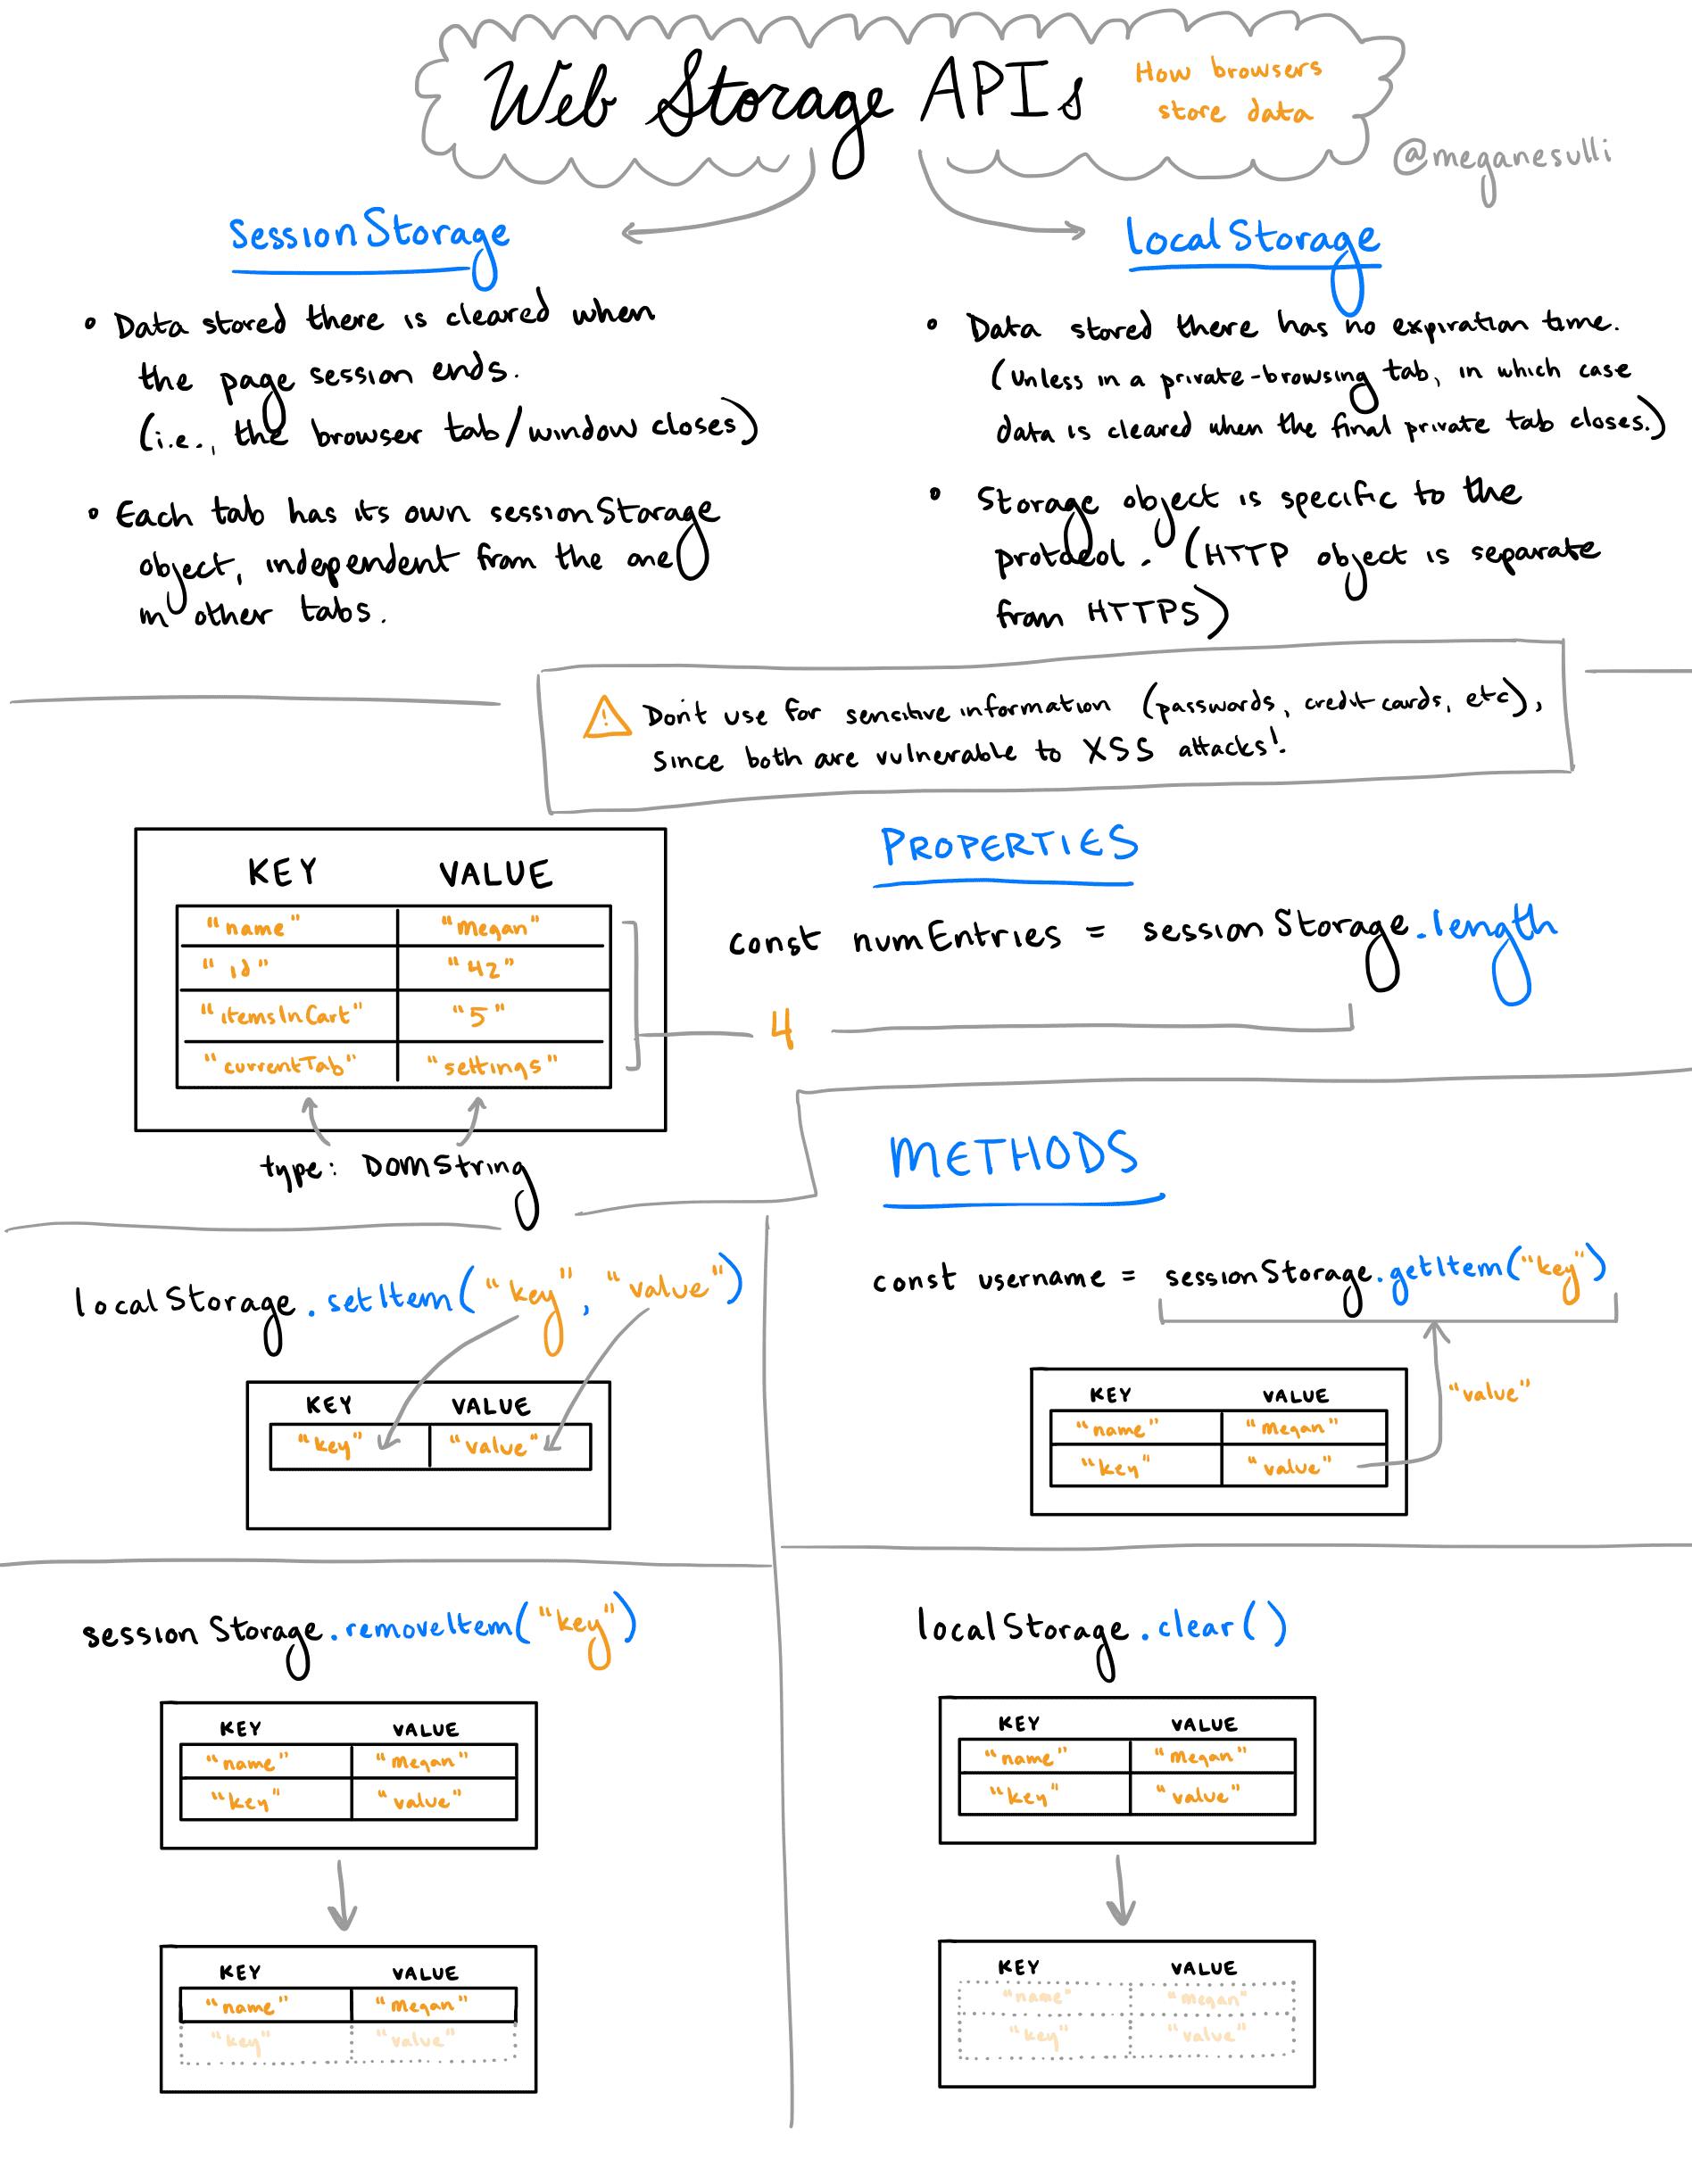 A sketchnote about localStorage and sessionStorage